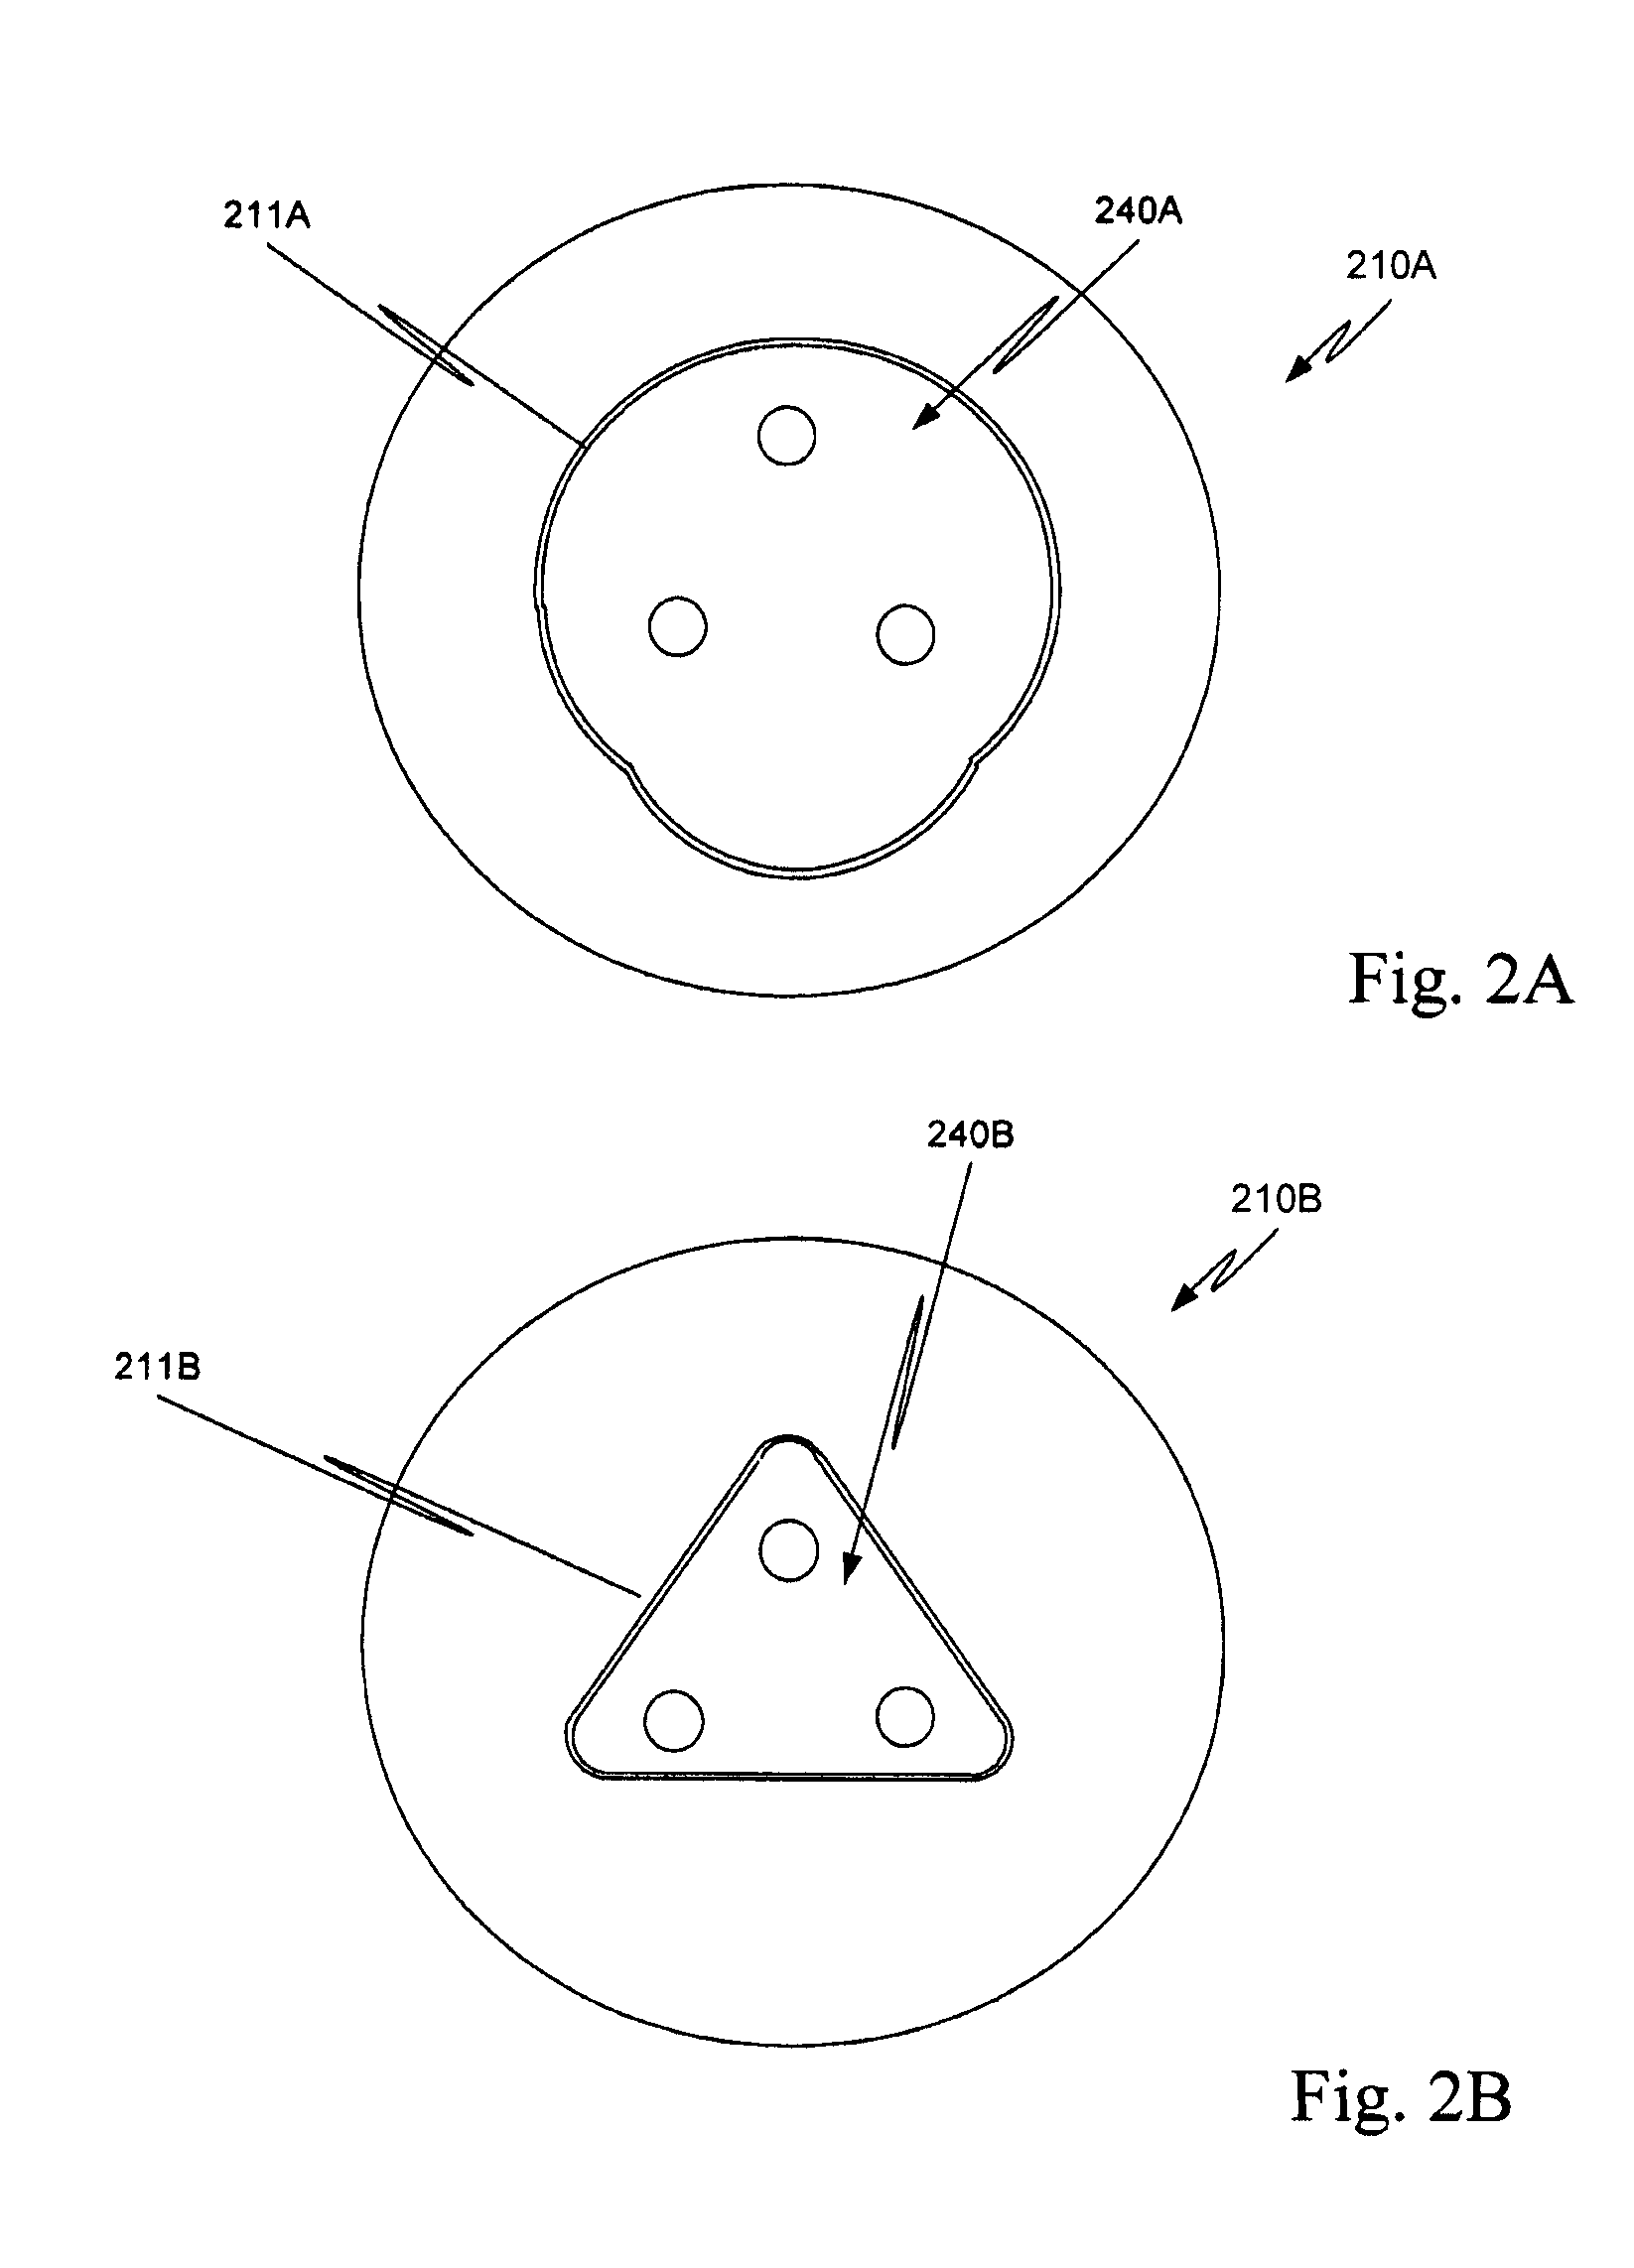 Method and system for absolute three-dimensional measurements using a twist-insensitive shape sensor